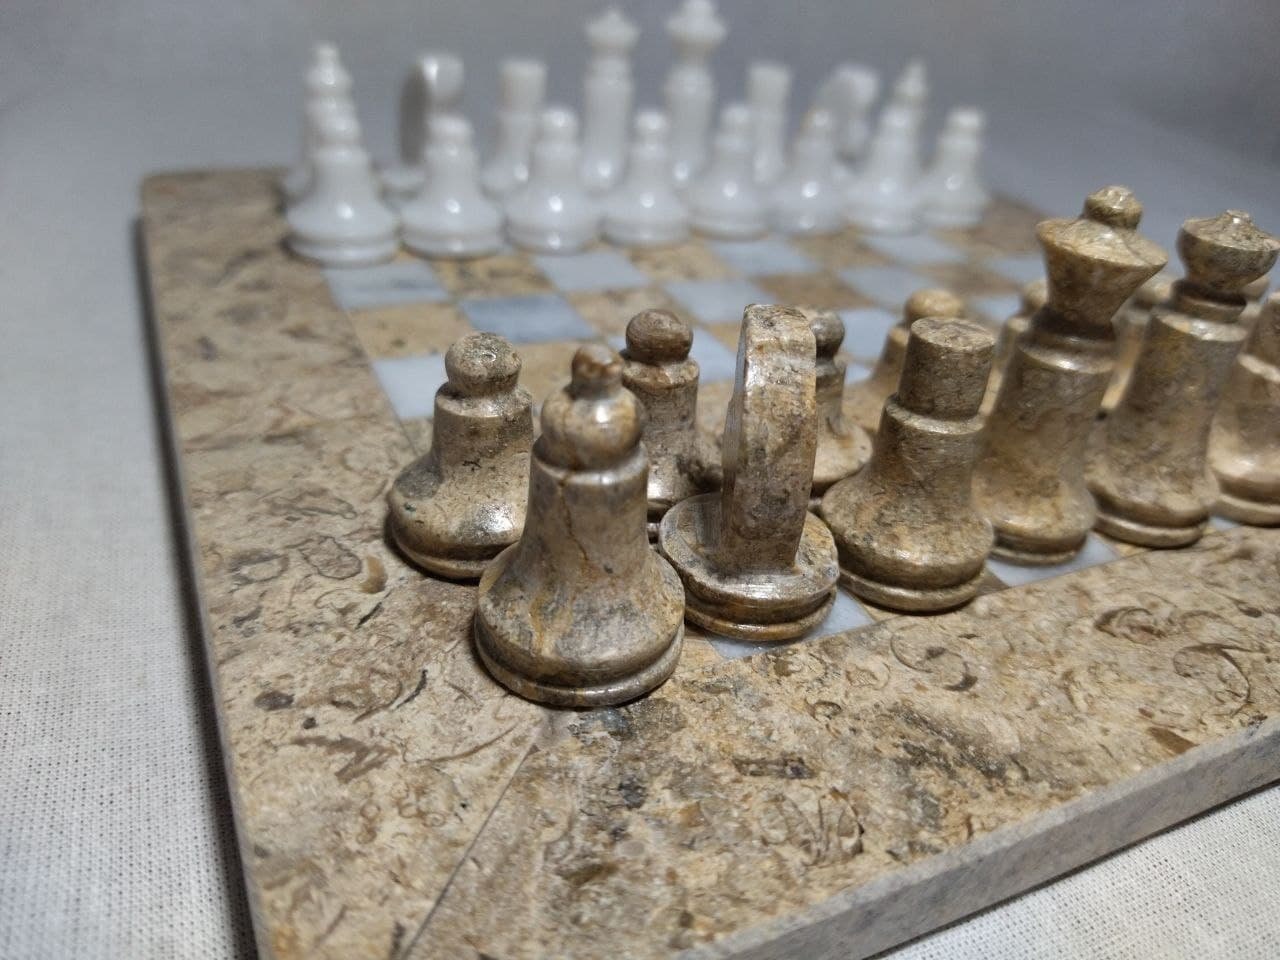 Exclusive chess set Oriental large 600140165 (gold/silver plated, marble  chessboard)